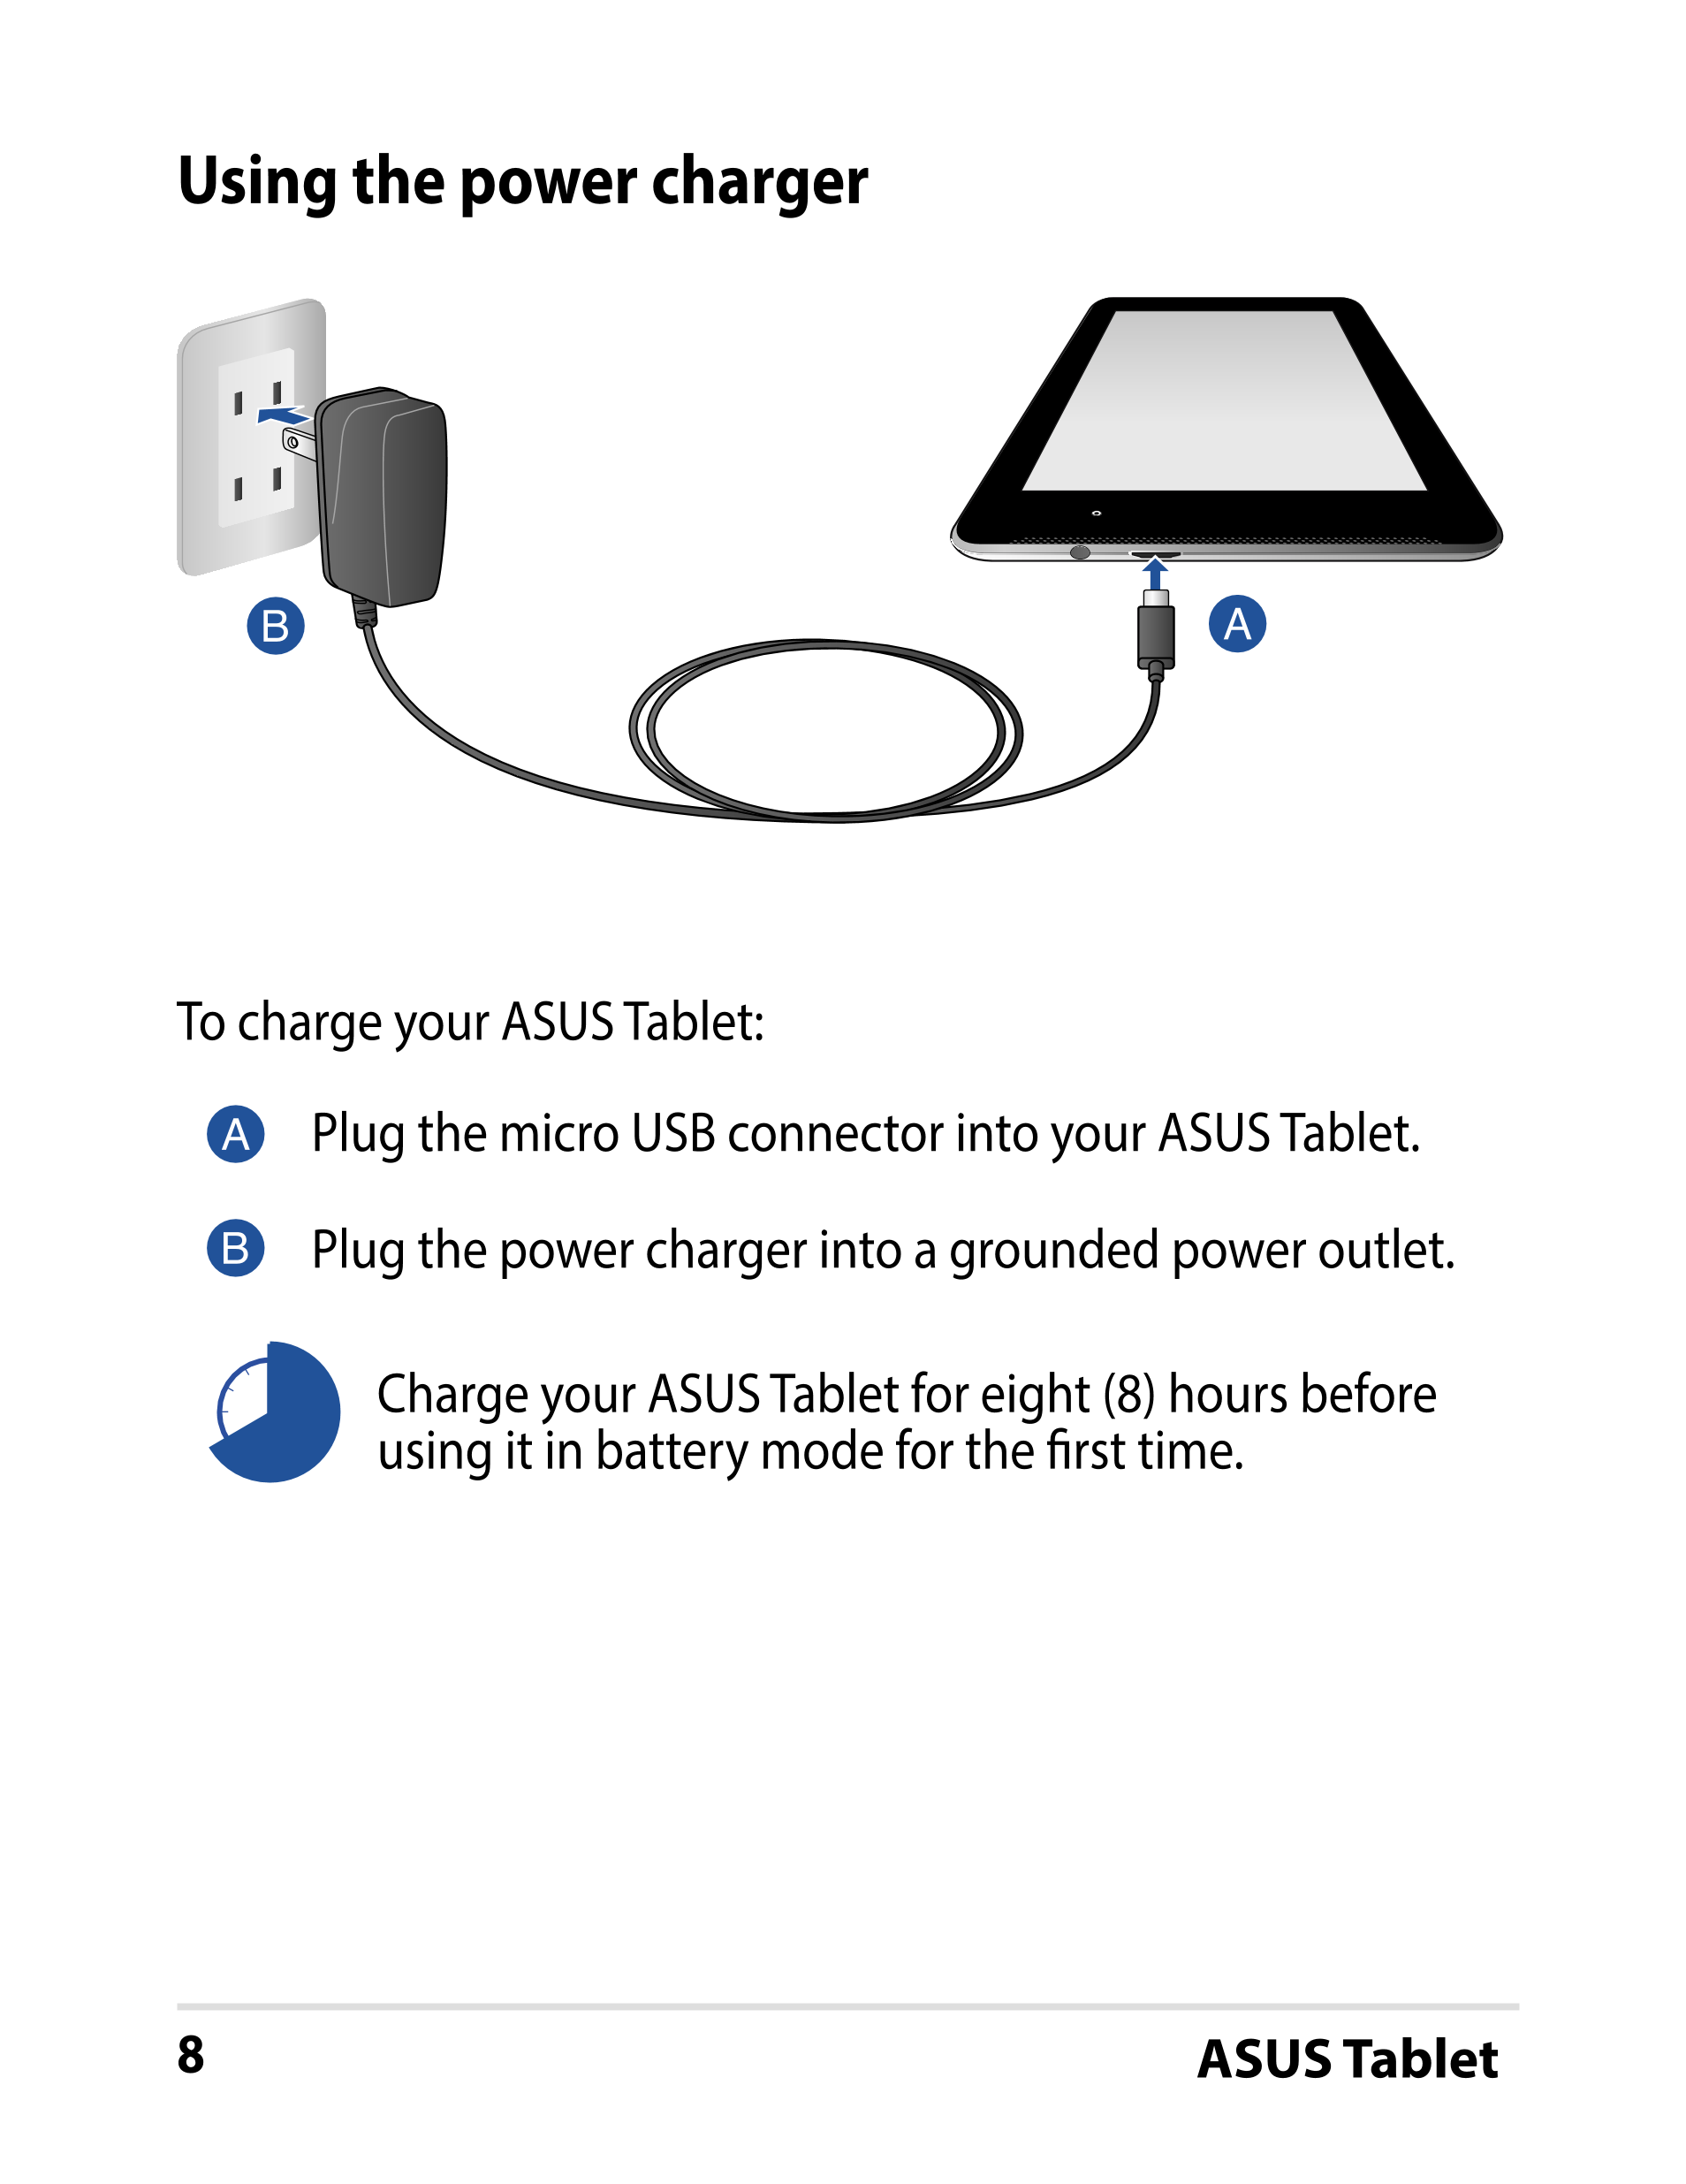 Using the power charger
To charge your ASUS Tablet:
Plug the micro USB connector into your ASUS Tablet.
Plug the power charger i